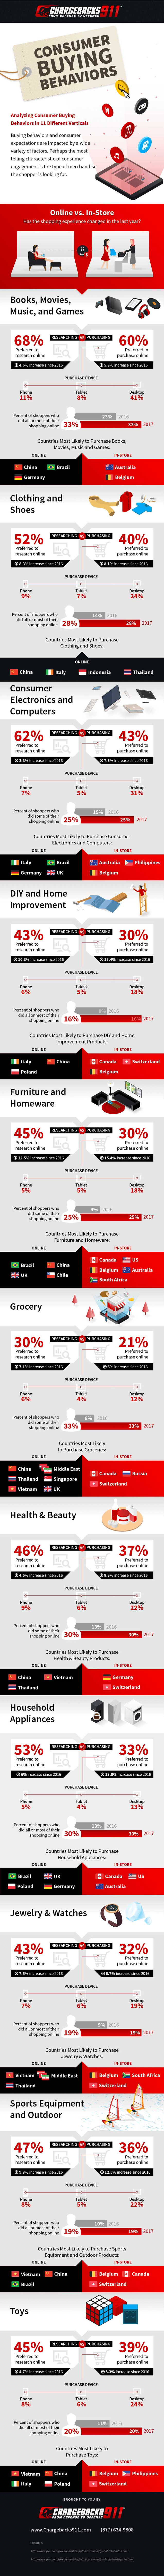 Consumer Purchase Behavior by Industry, Device, and Country 